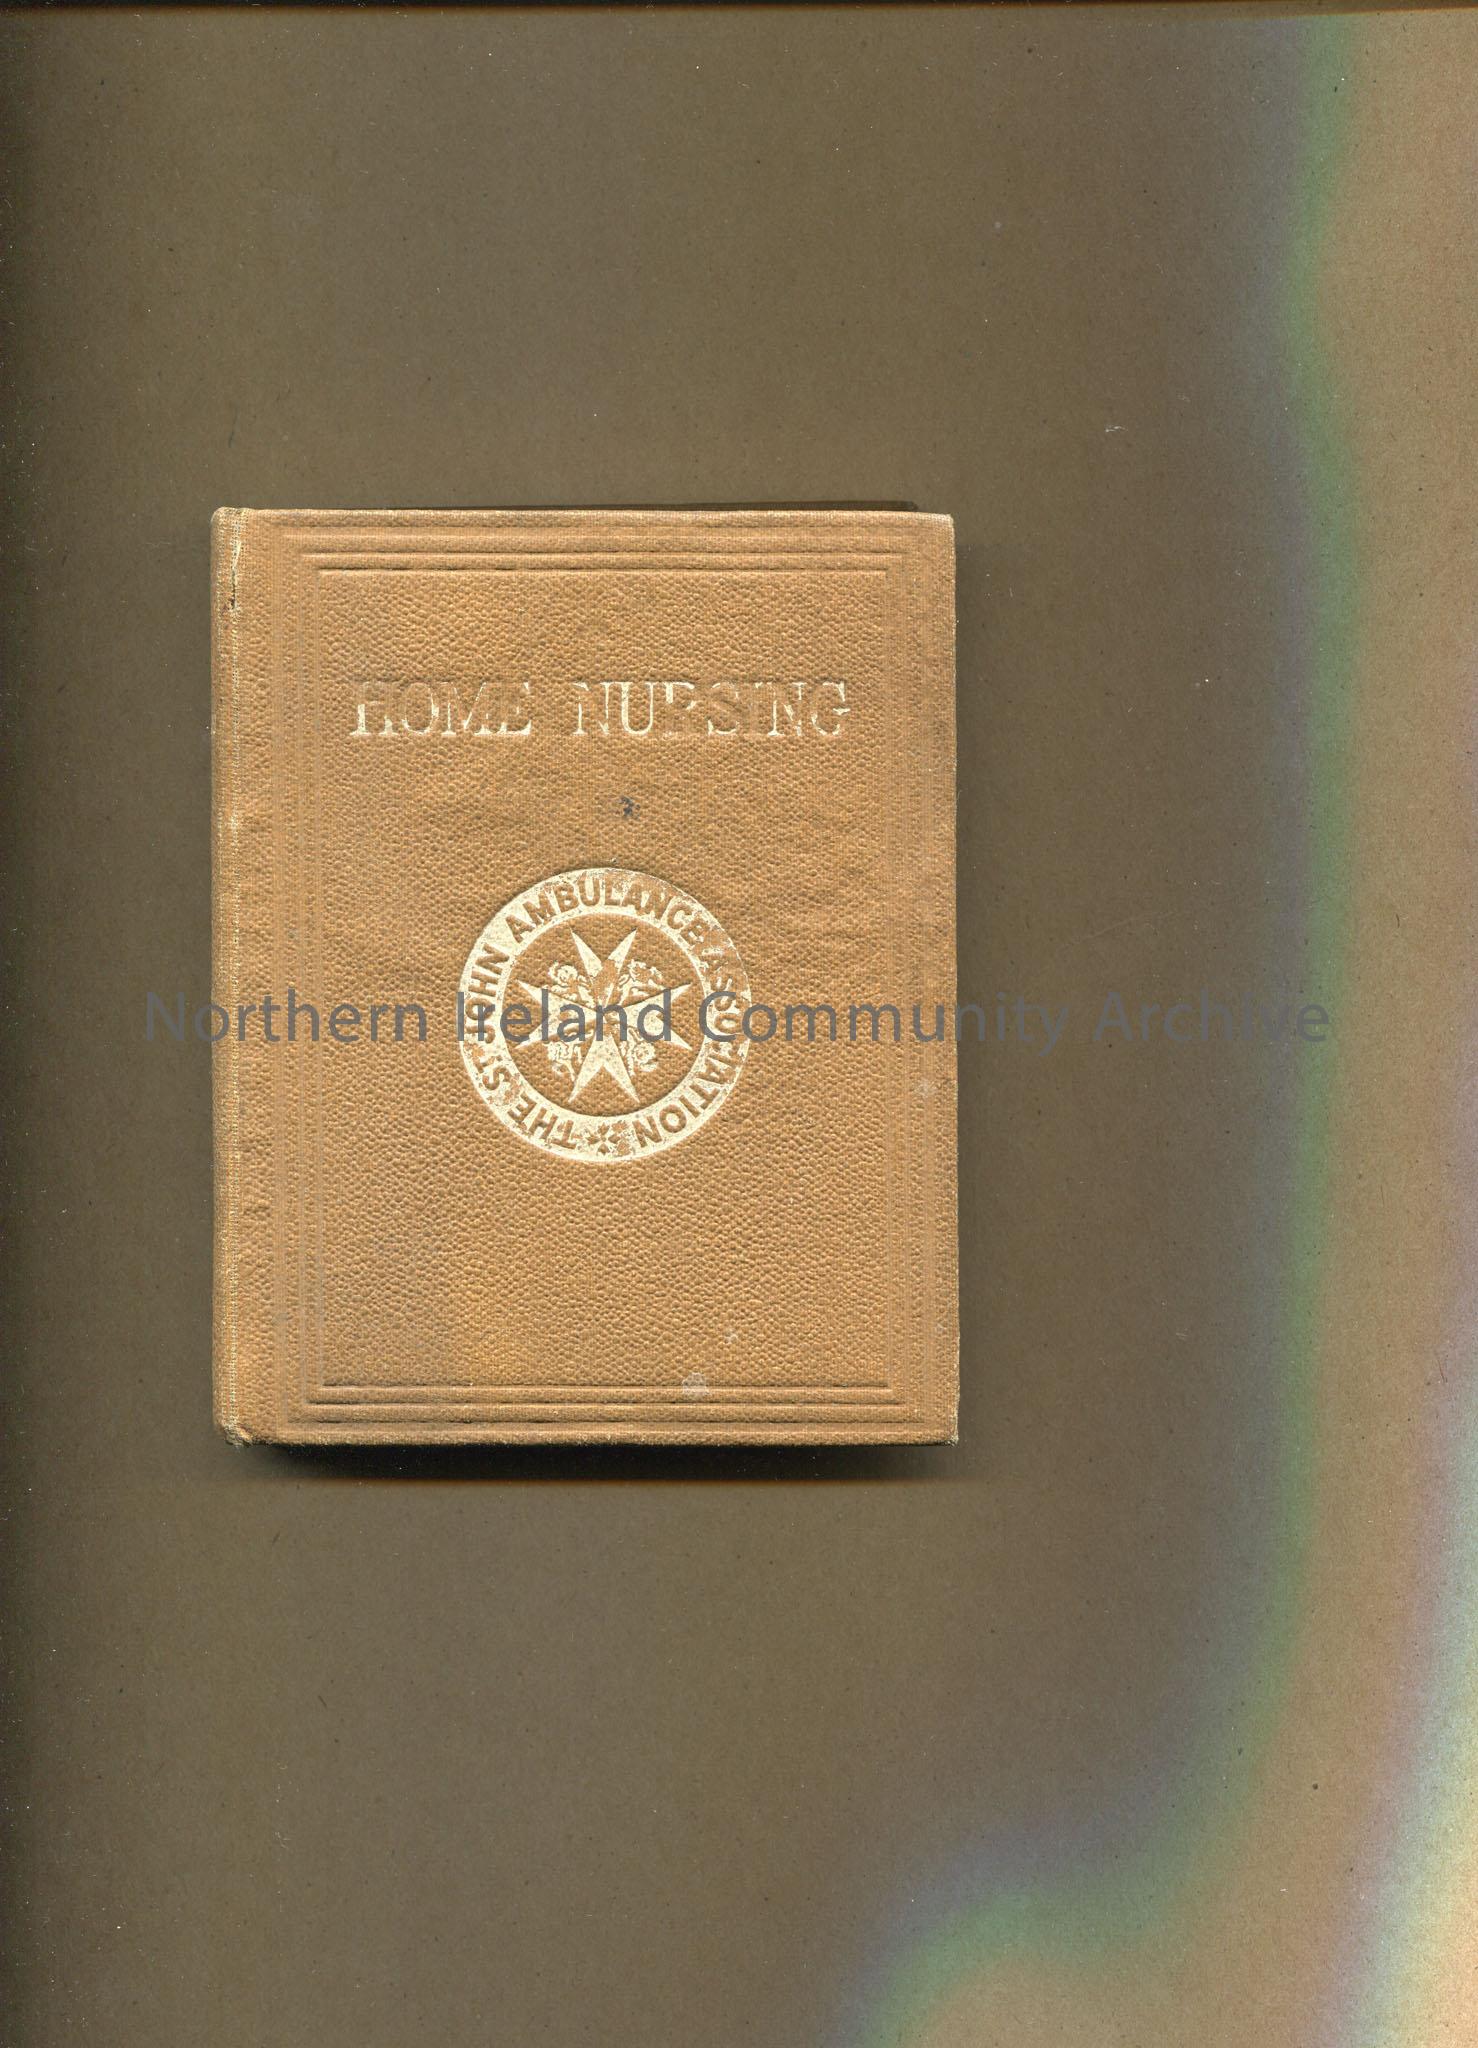 ‘Home Nursing’, The St. John’s Ambulance Association. Dorothy Walker, Sept, 1939 written on inside cover. Notes written in pencil on back pages. Brown…